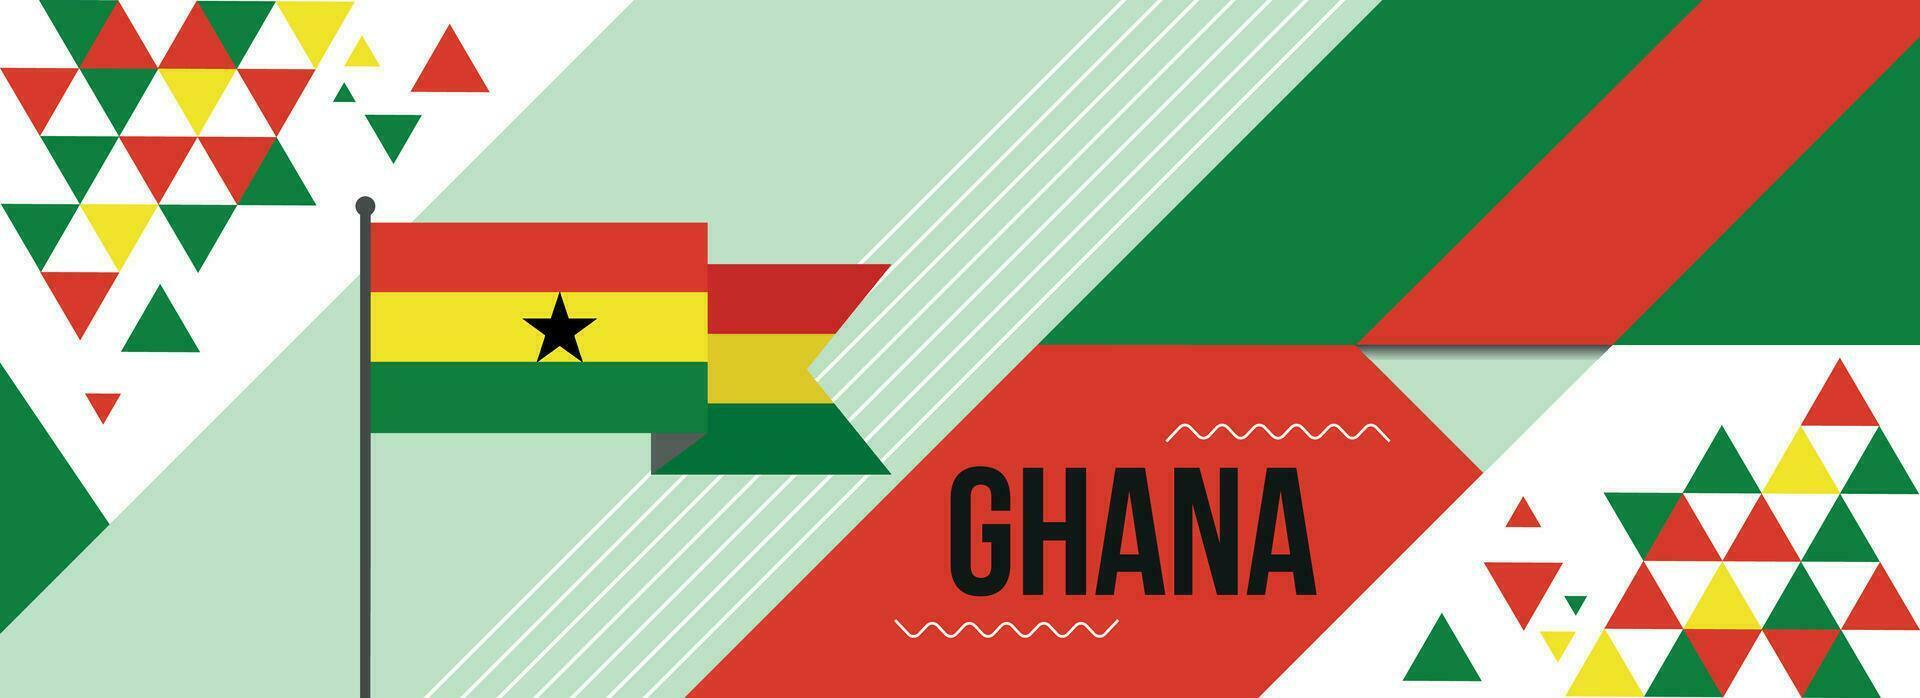 Ghana national or independence day banner design for country celebration. Flag of Ghana with modern retro design and abstract geometric icons. Vector illustration.